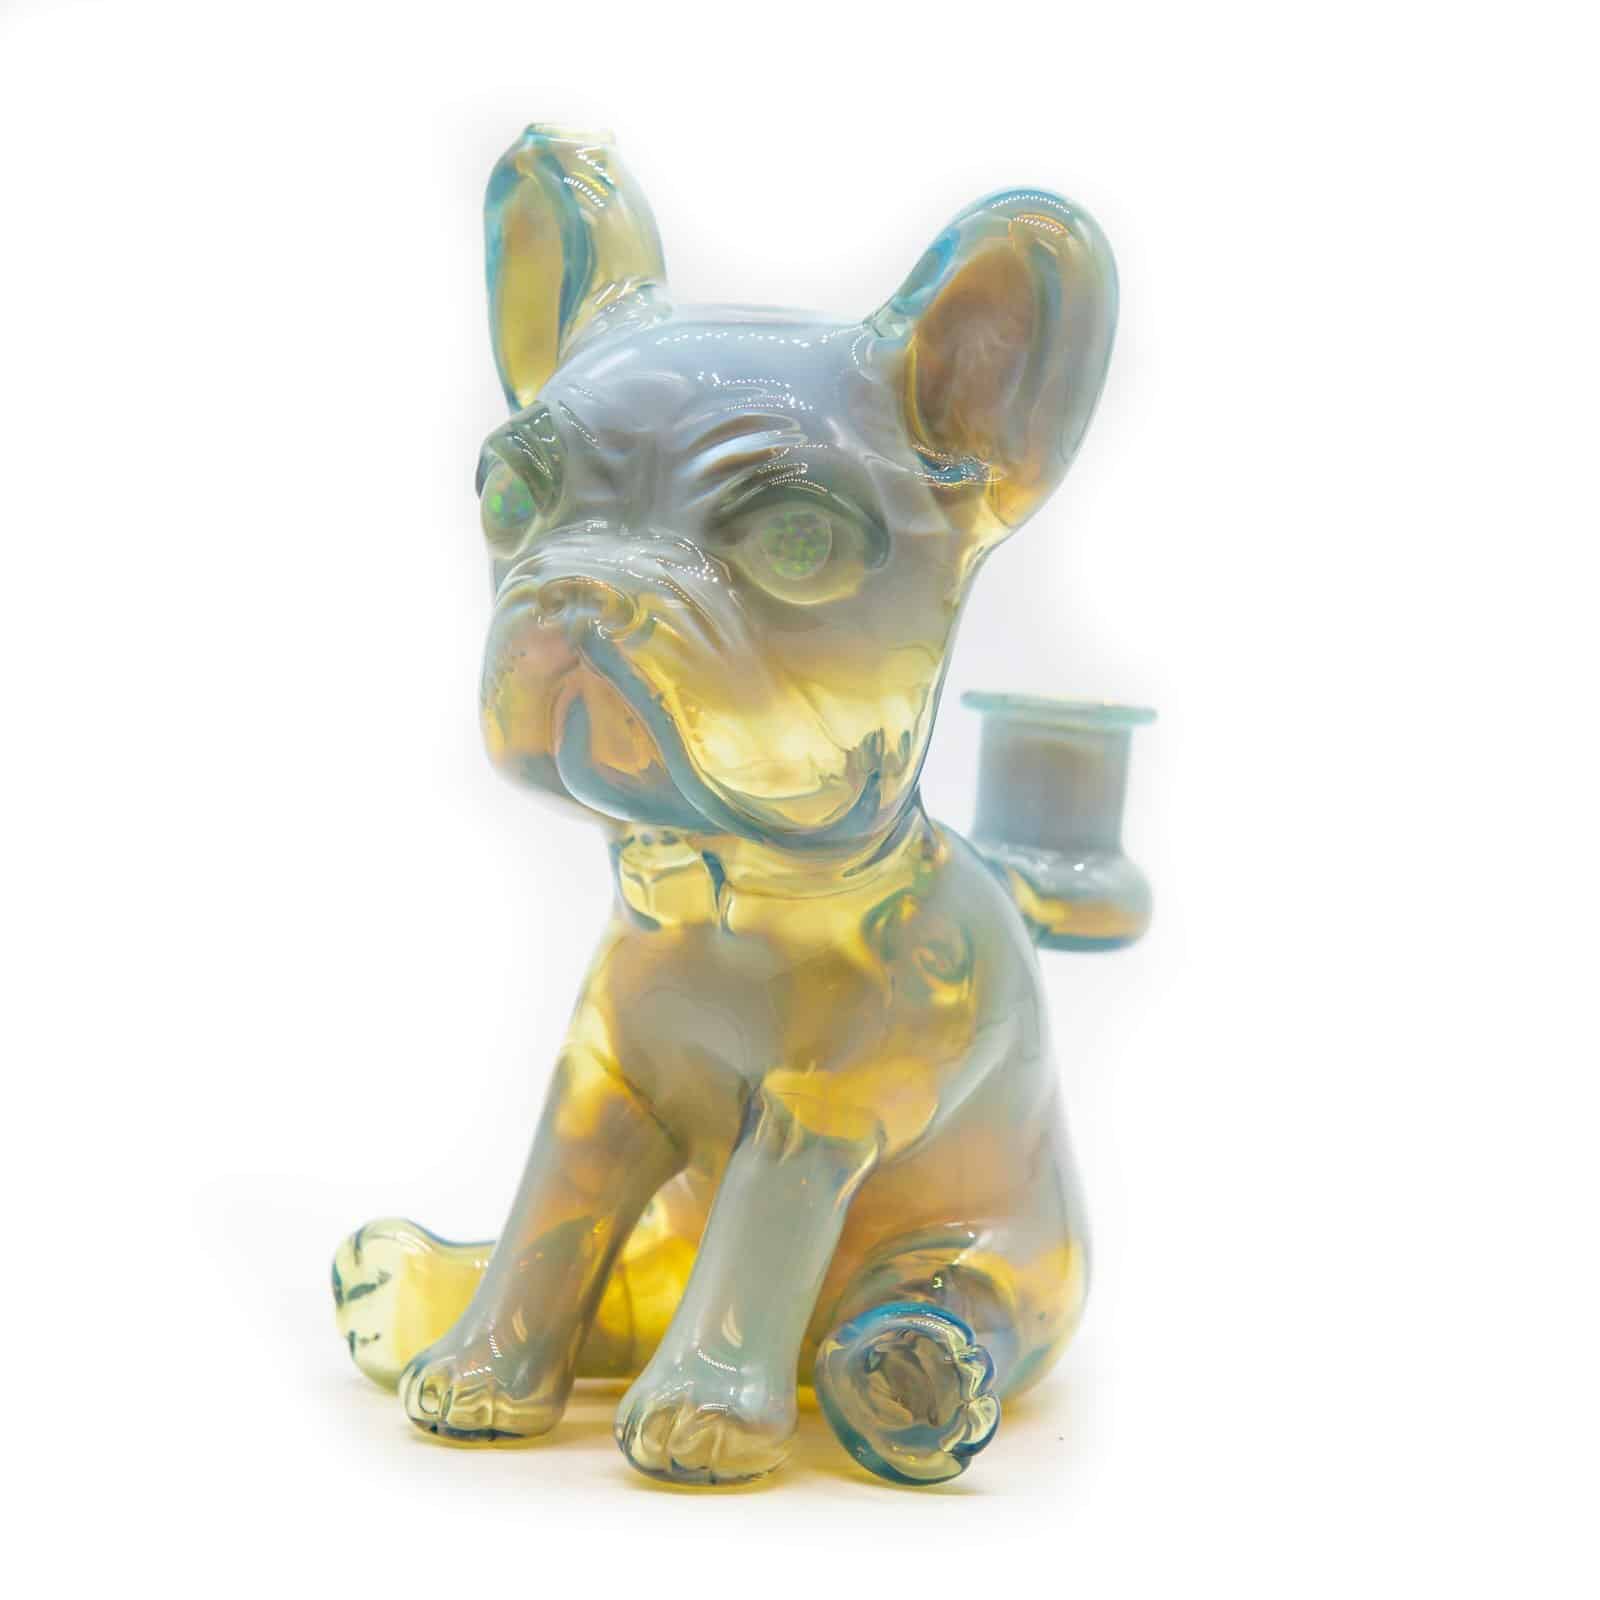 luxurious design of the [SW2]  Mirage CFL Full-size Frenchie Rig with Opal Eyes Set by Swanny (w/ matching Opal Eyes Frenchie Pendant, Frenchie Spinner Cap, Bobblehead Opal Eyes Pendant, a Swanny Moodmat, and a signed 1300 P